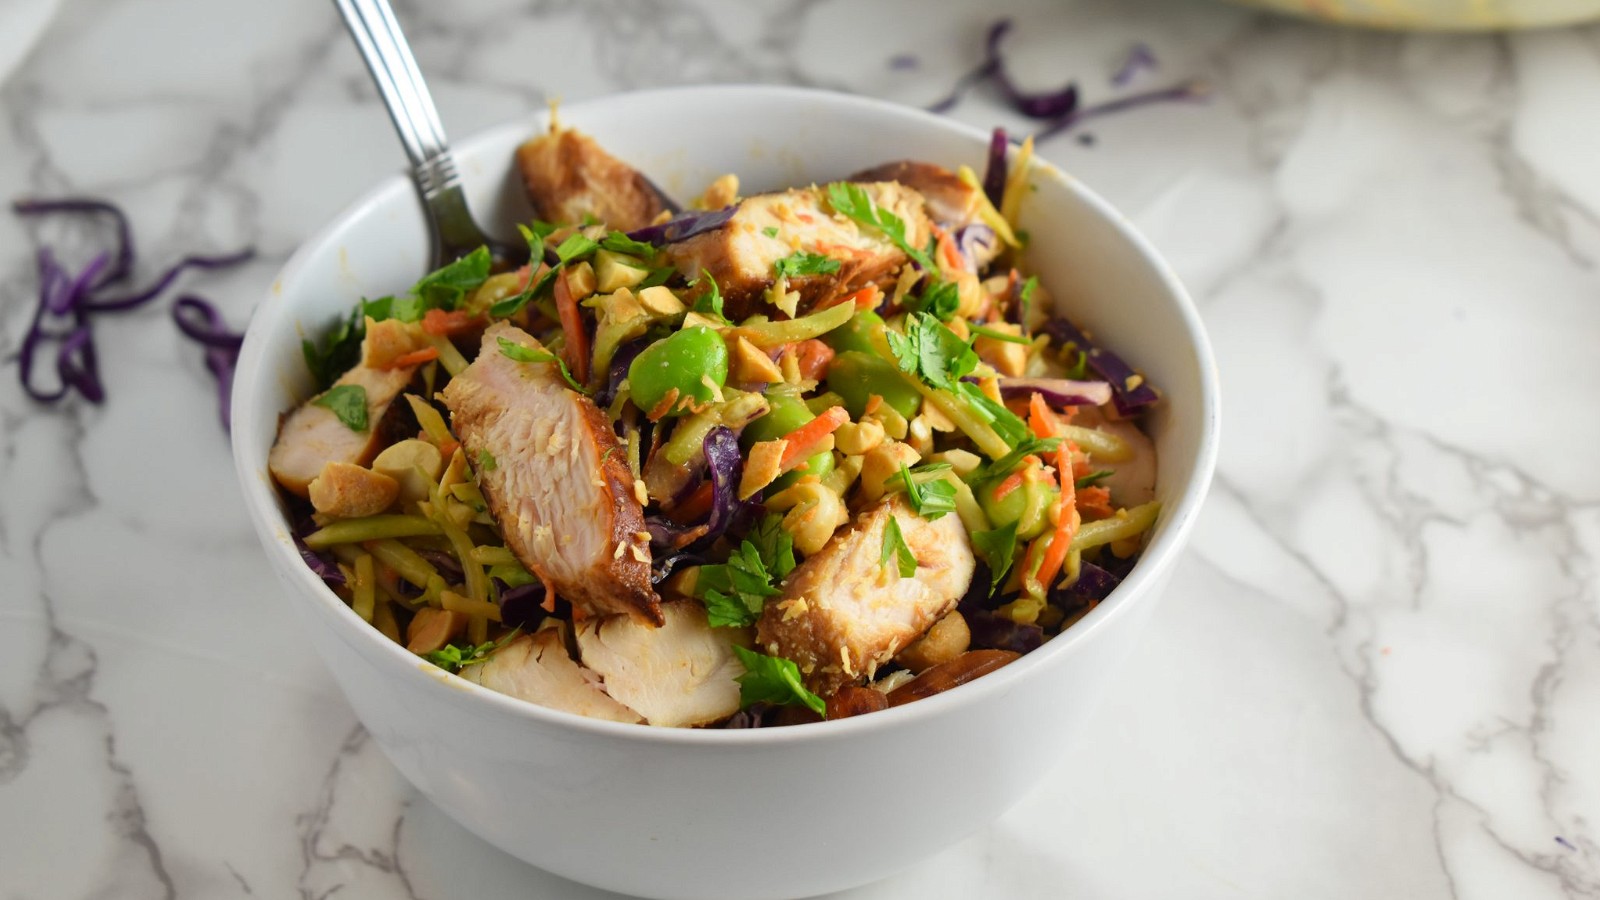 Image of Broccoli Slaw with Chicken